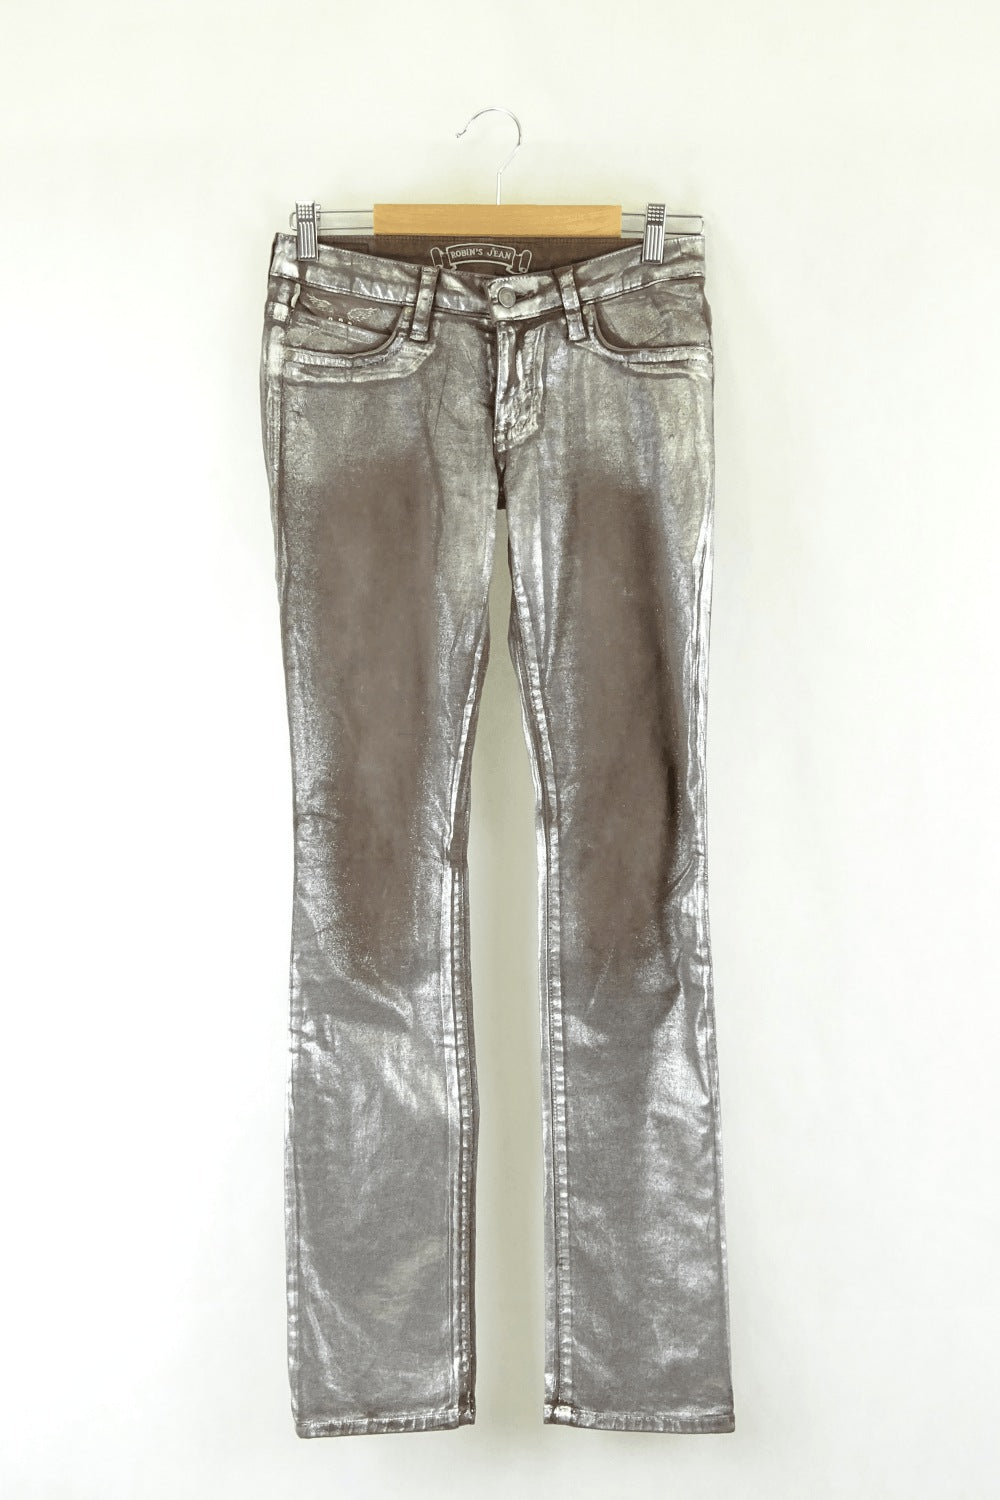 Robins Jeans Silver Painted 6